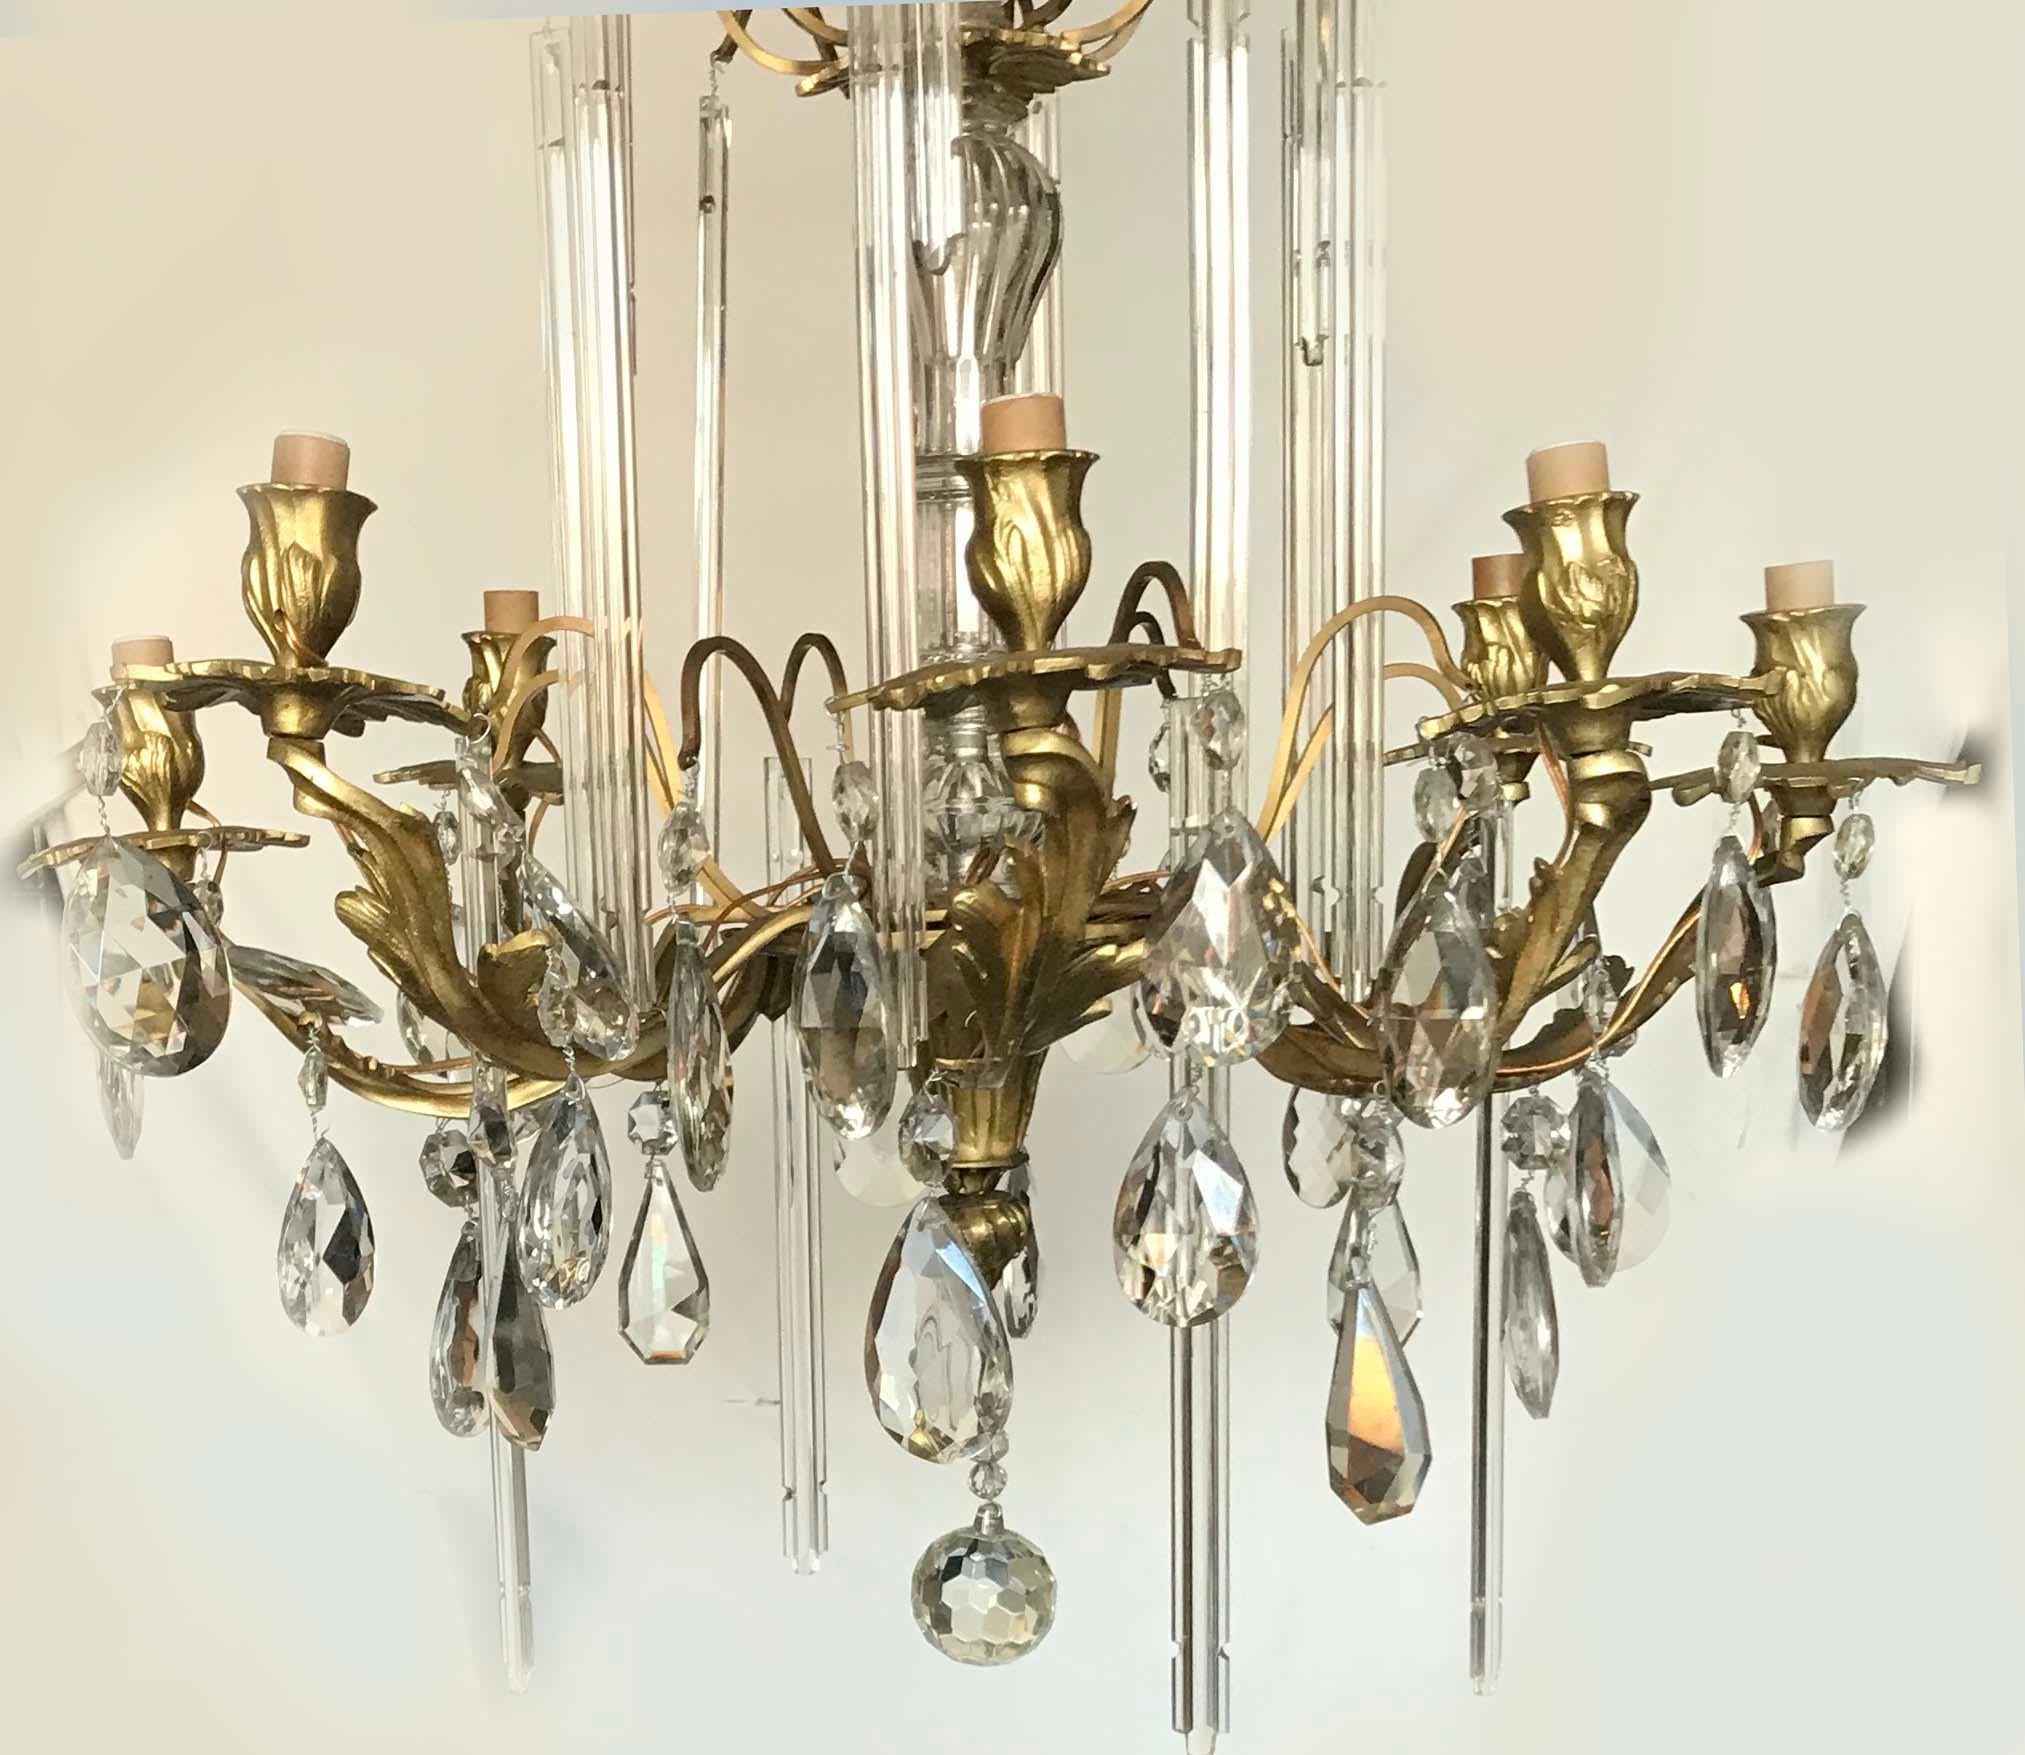 Superb bronze and crystal chandelier, 8 lights , 60 watts max bulb
US rewired and in working condition
Totally restored and refinished
From A Nice côte D’azur estate.